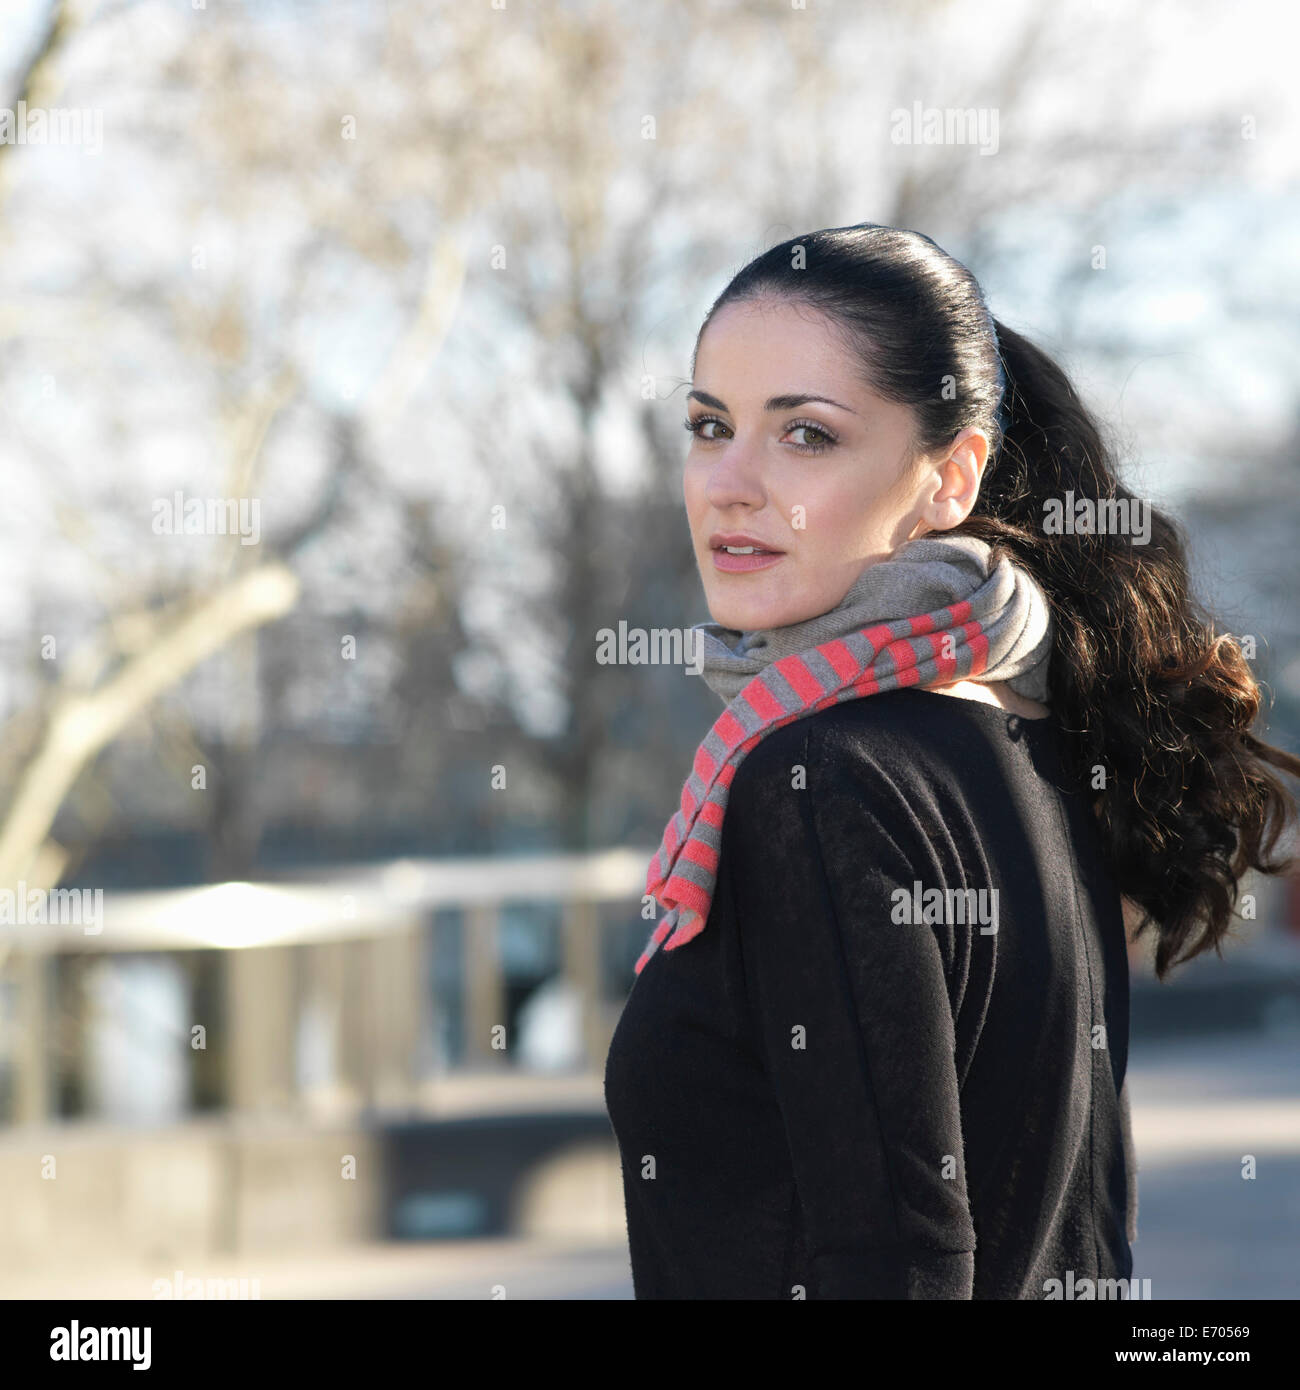 Portrait of young woman looking over her shoulder Stock Photo